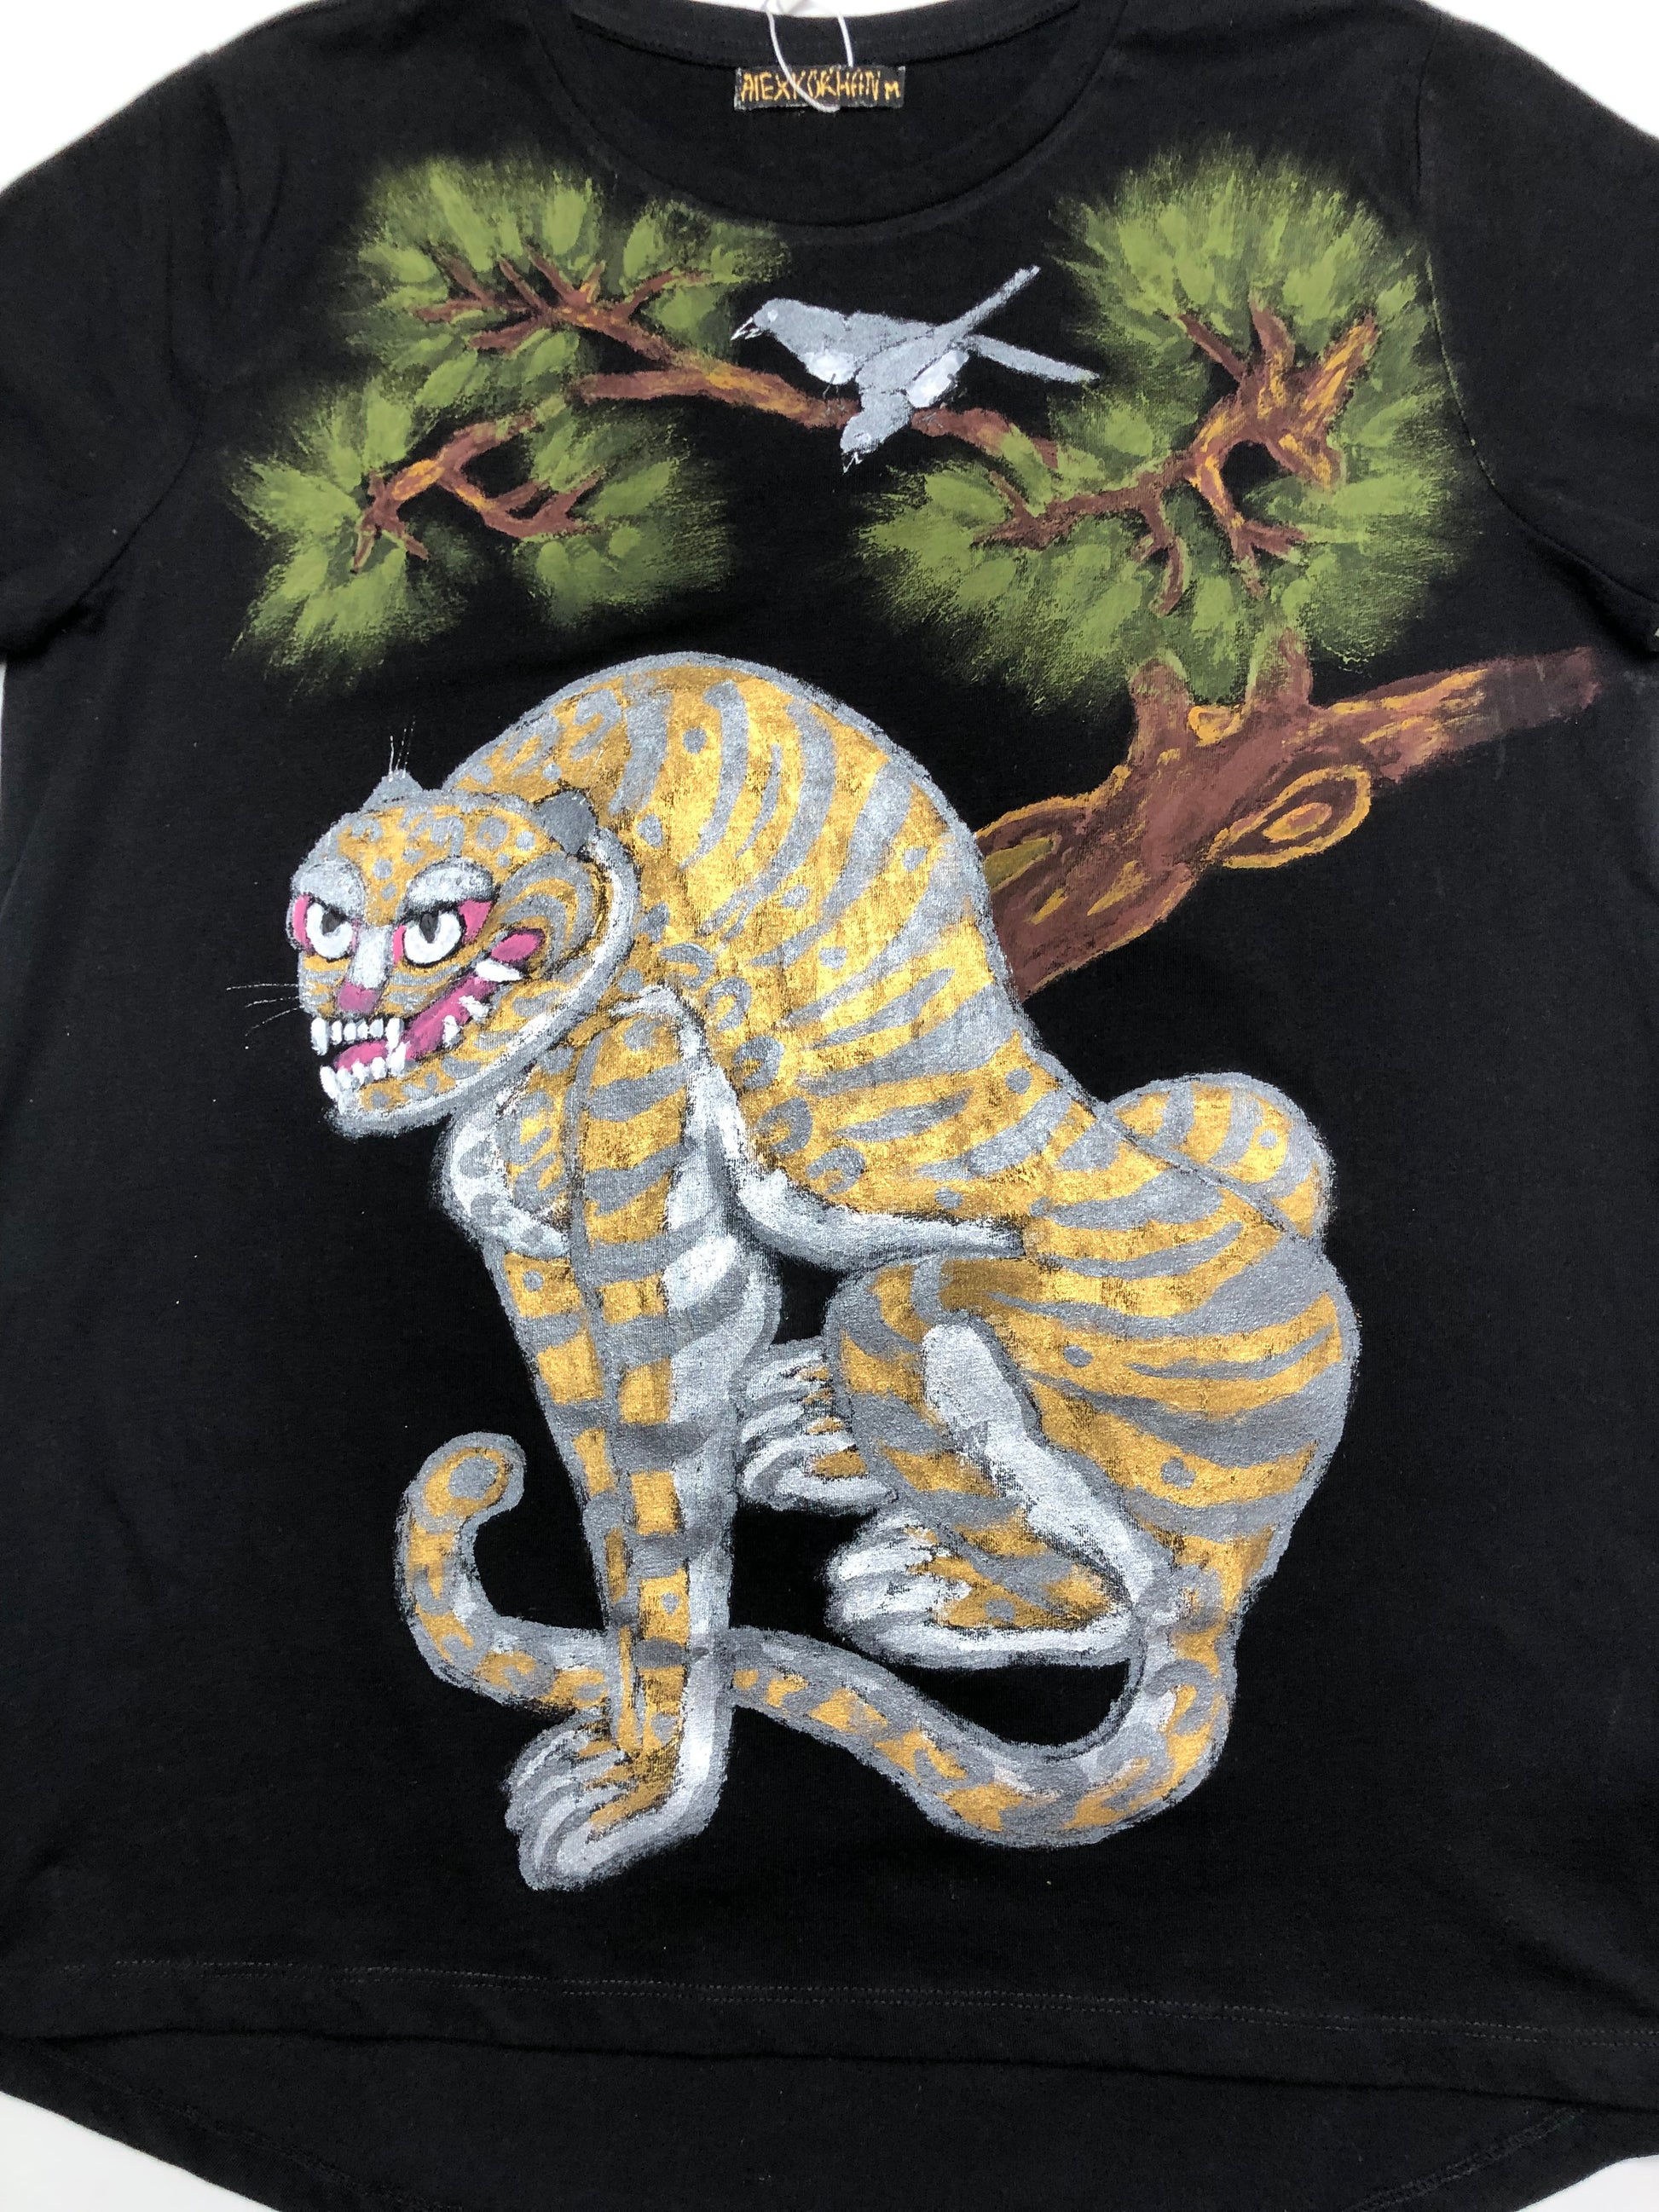 Women's short sleeve t-shirt fanged tiger design details of hand painted tiger muzzle, bird and tree